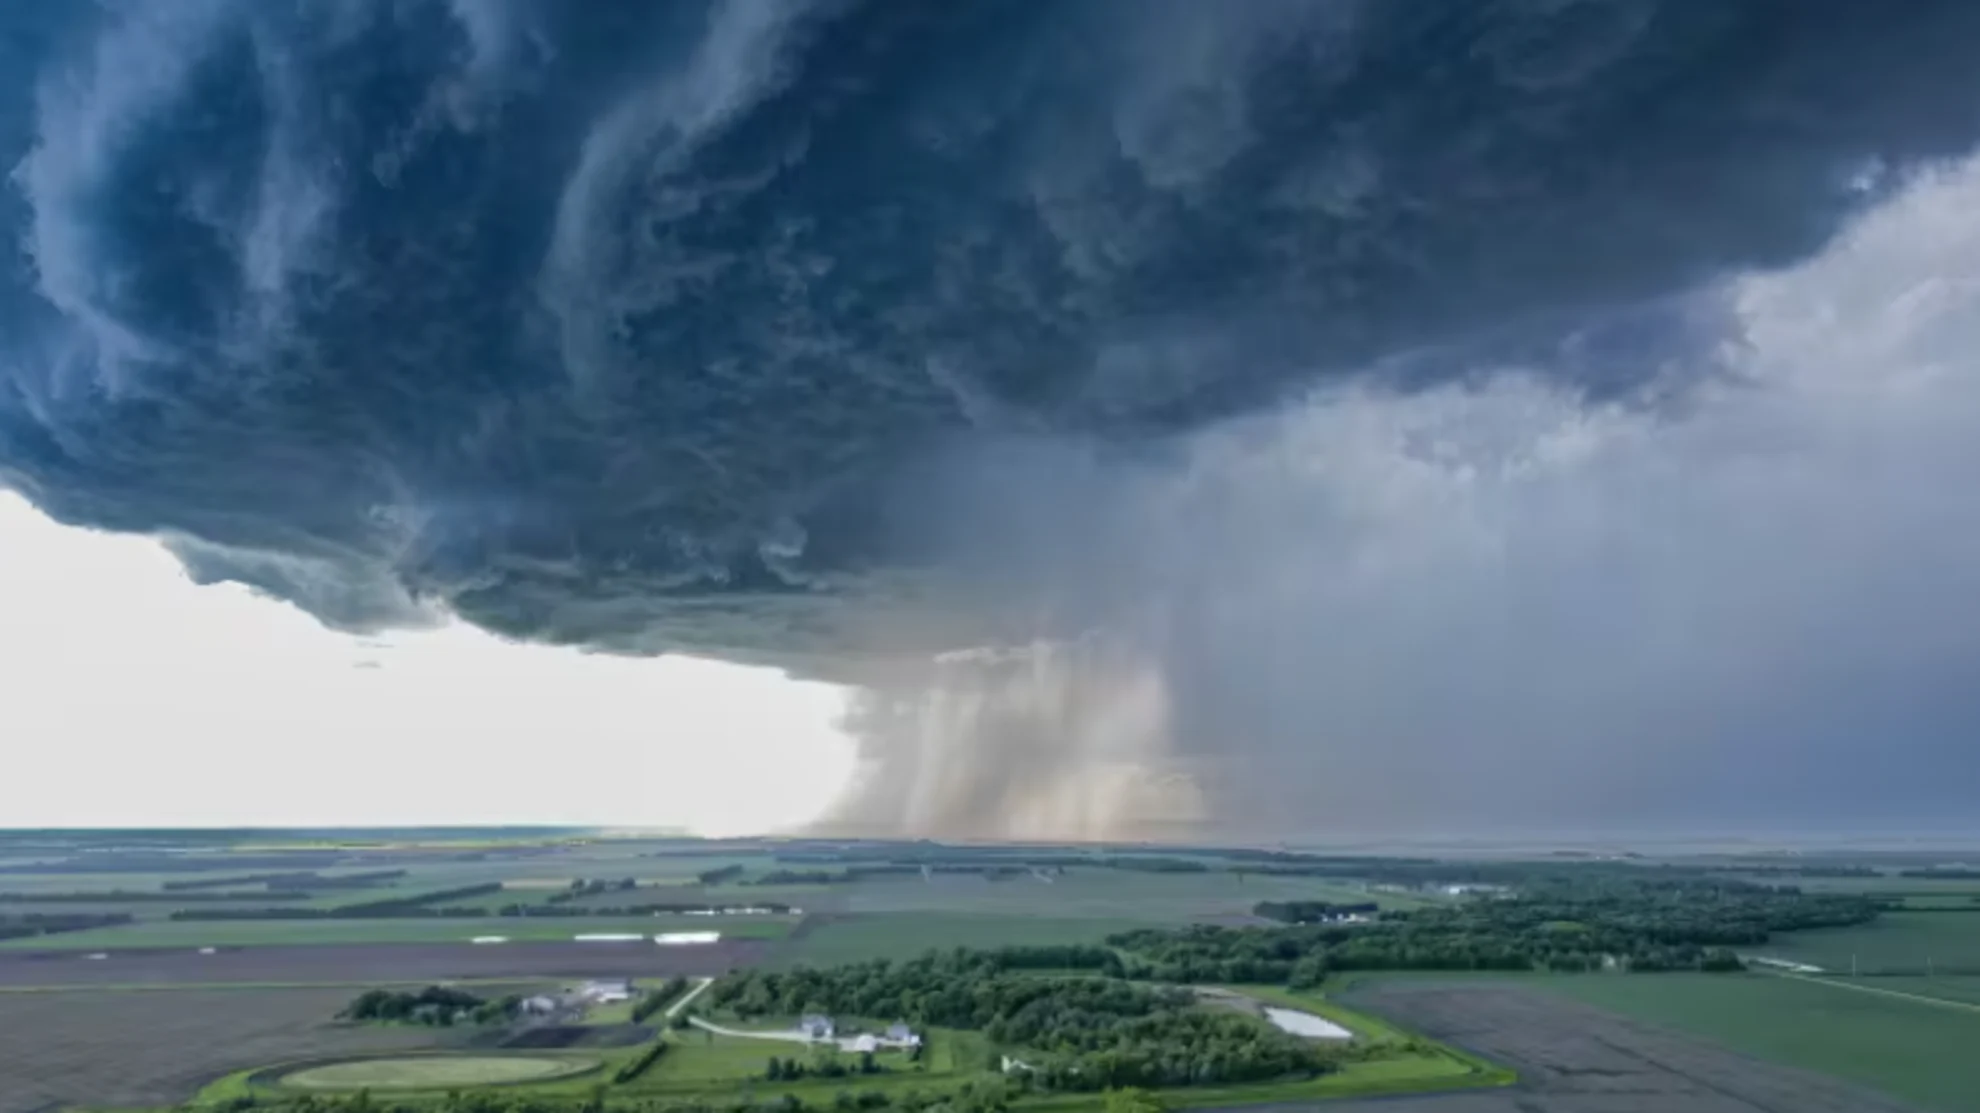 Multiple tornadoes touch down in Manitoba storm Wednesday